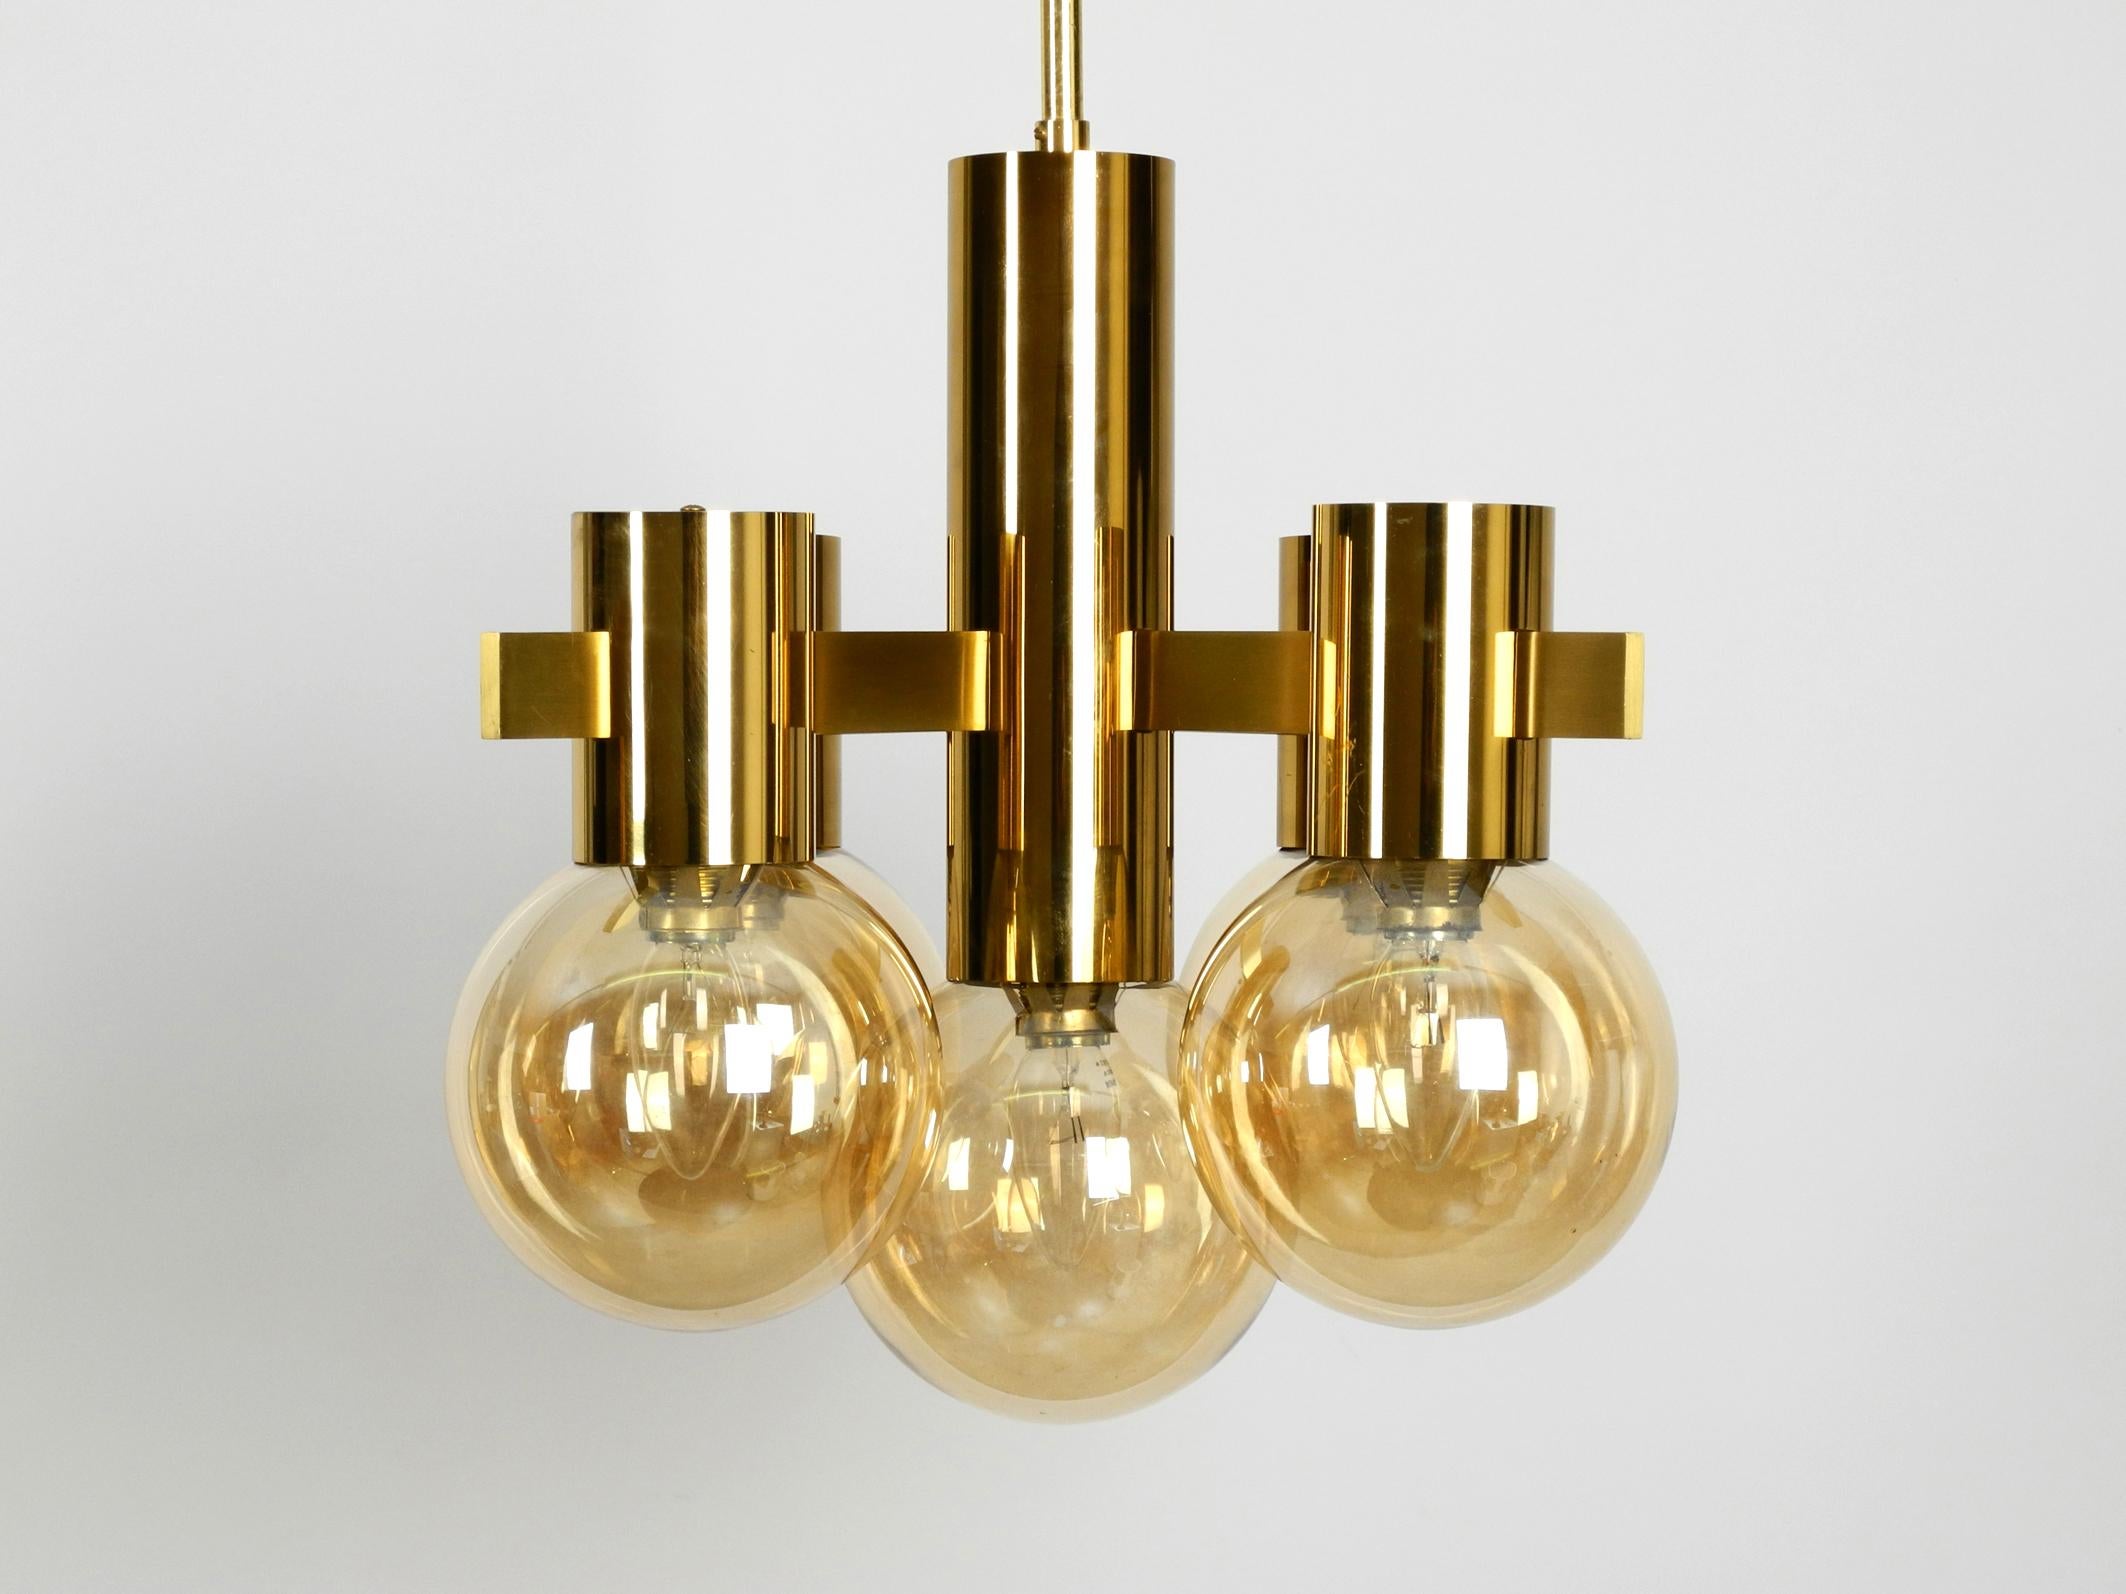 Space Age Beautiful 1960s Brass Ceiling Lamp by Hans Agne Jakobsson with 5 Glass Balls